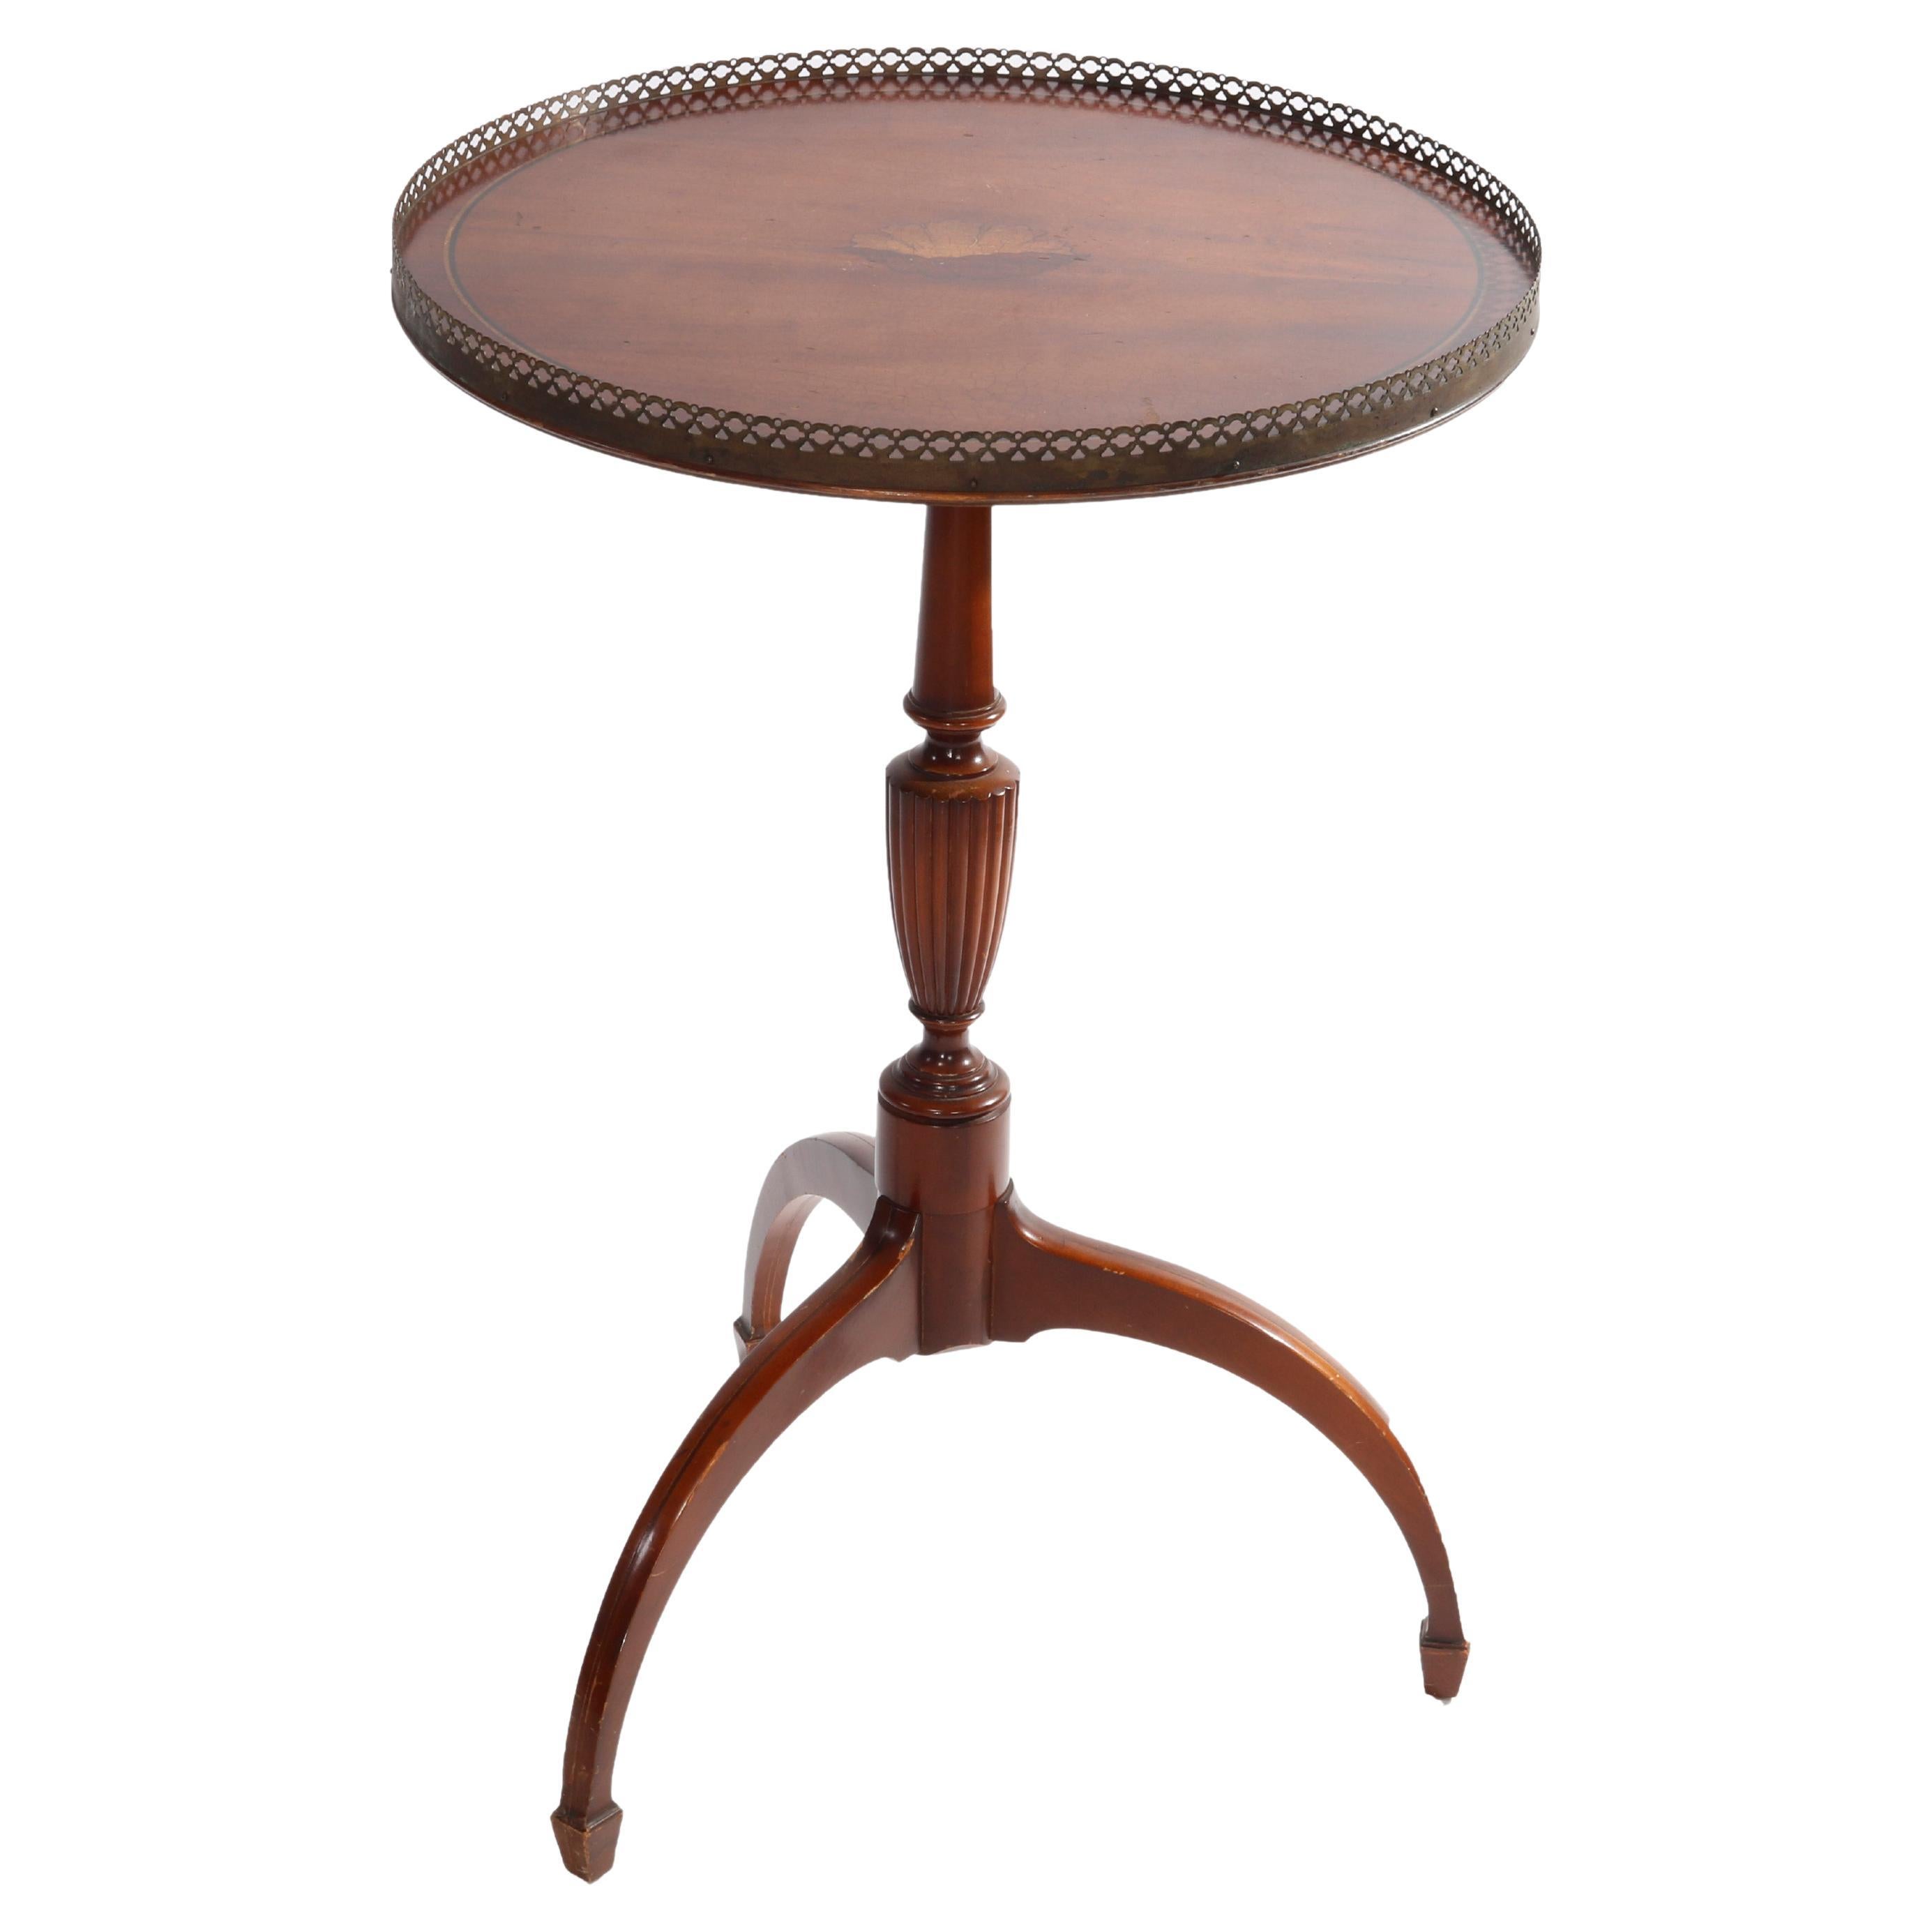 English Regency Mahogany Spider Leg Parlor Table with Inlay Shell Center, c1930 For Sale